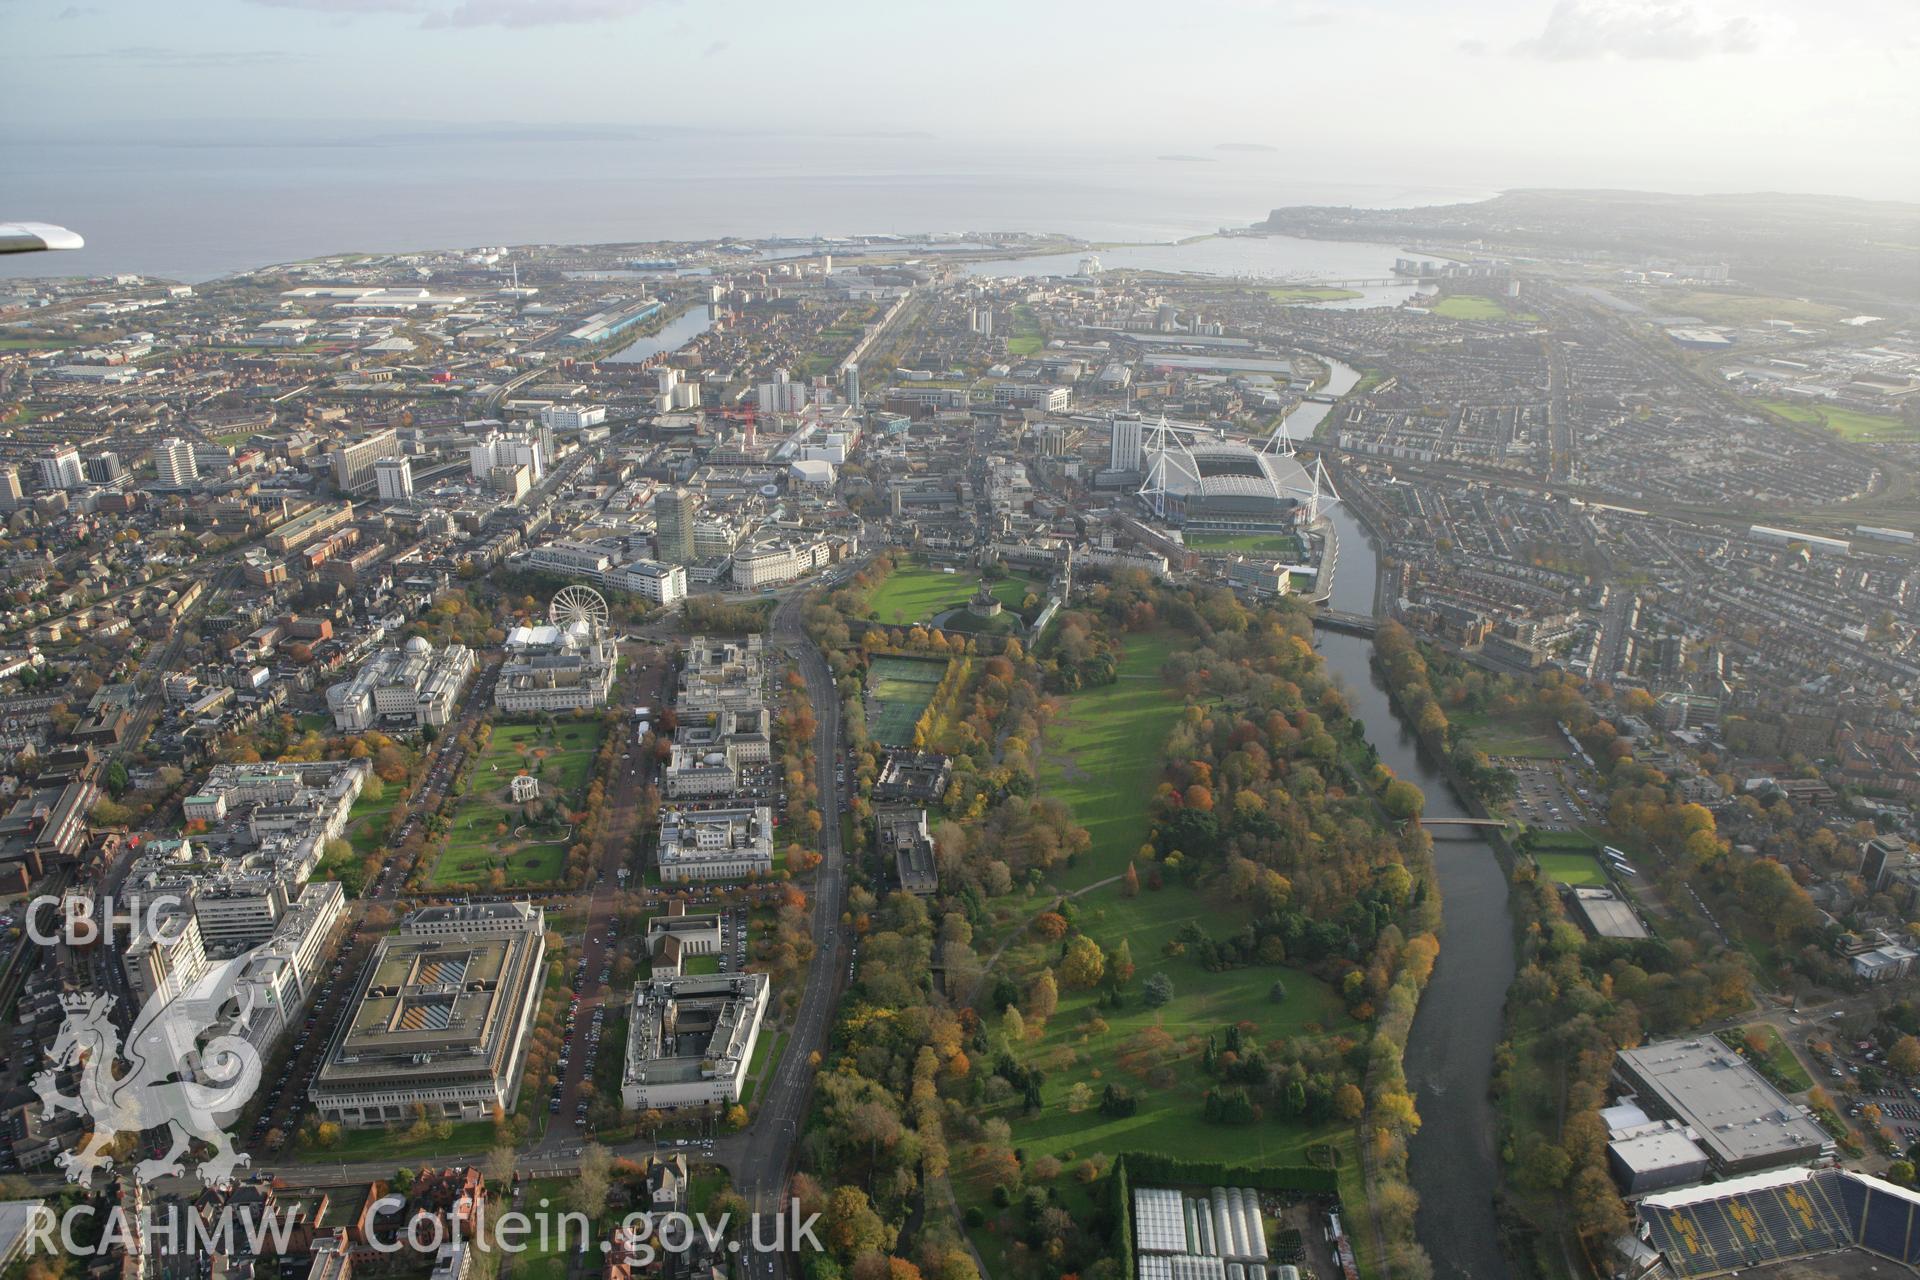 RCAHMW colour oblique photograph of Cardiff University and Bute Park, looking south towards Cardiff Bay. Taken by Toby Driver on 12/11/2008.